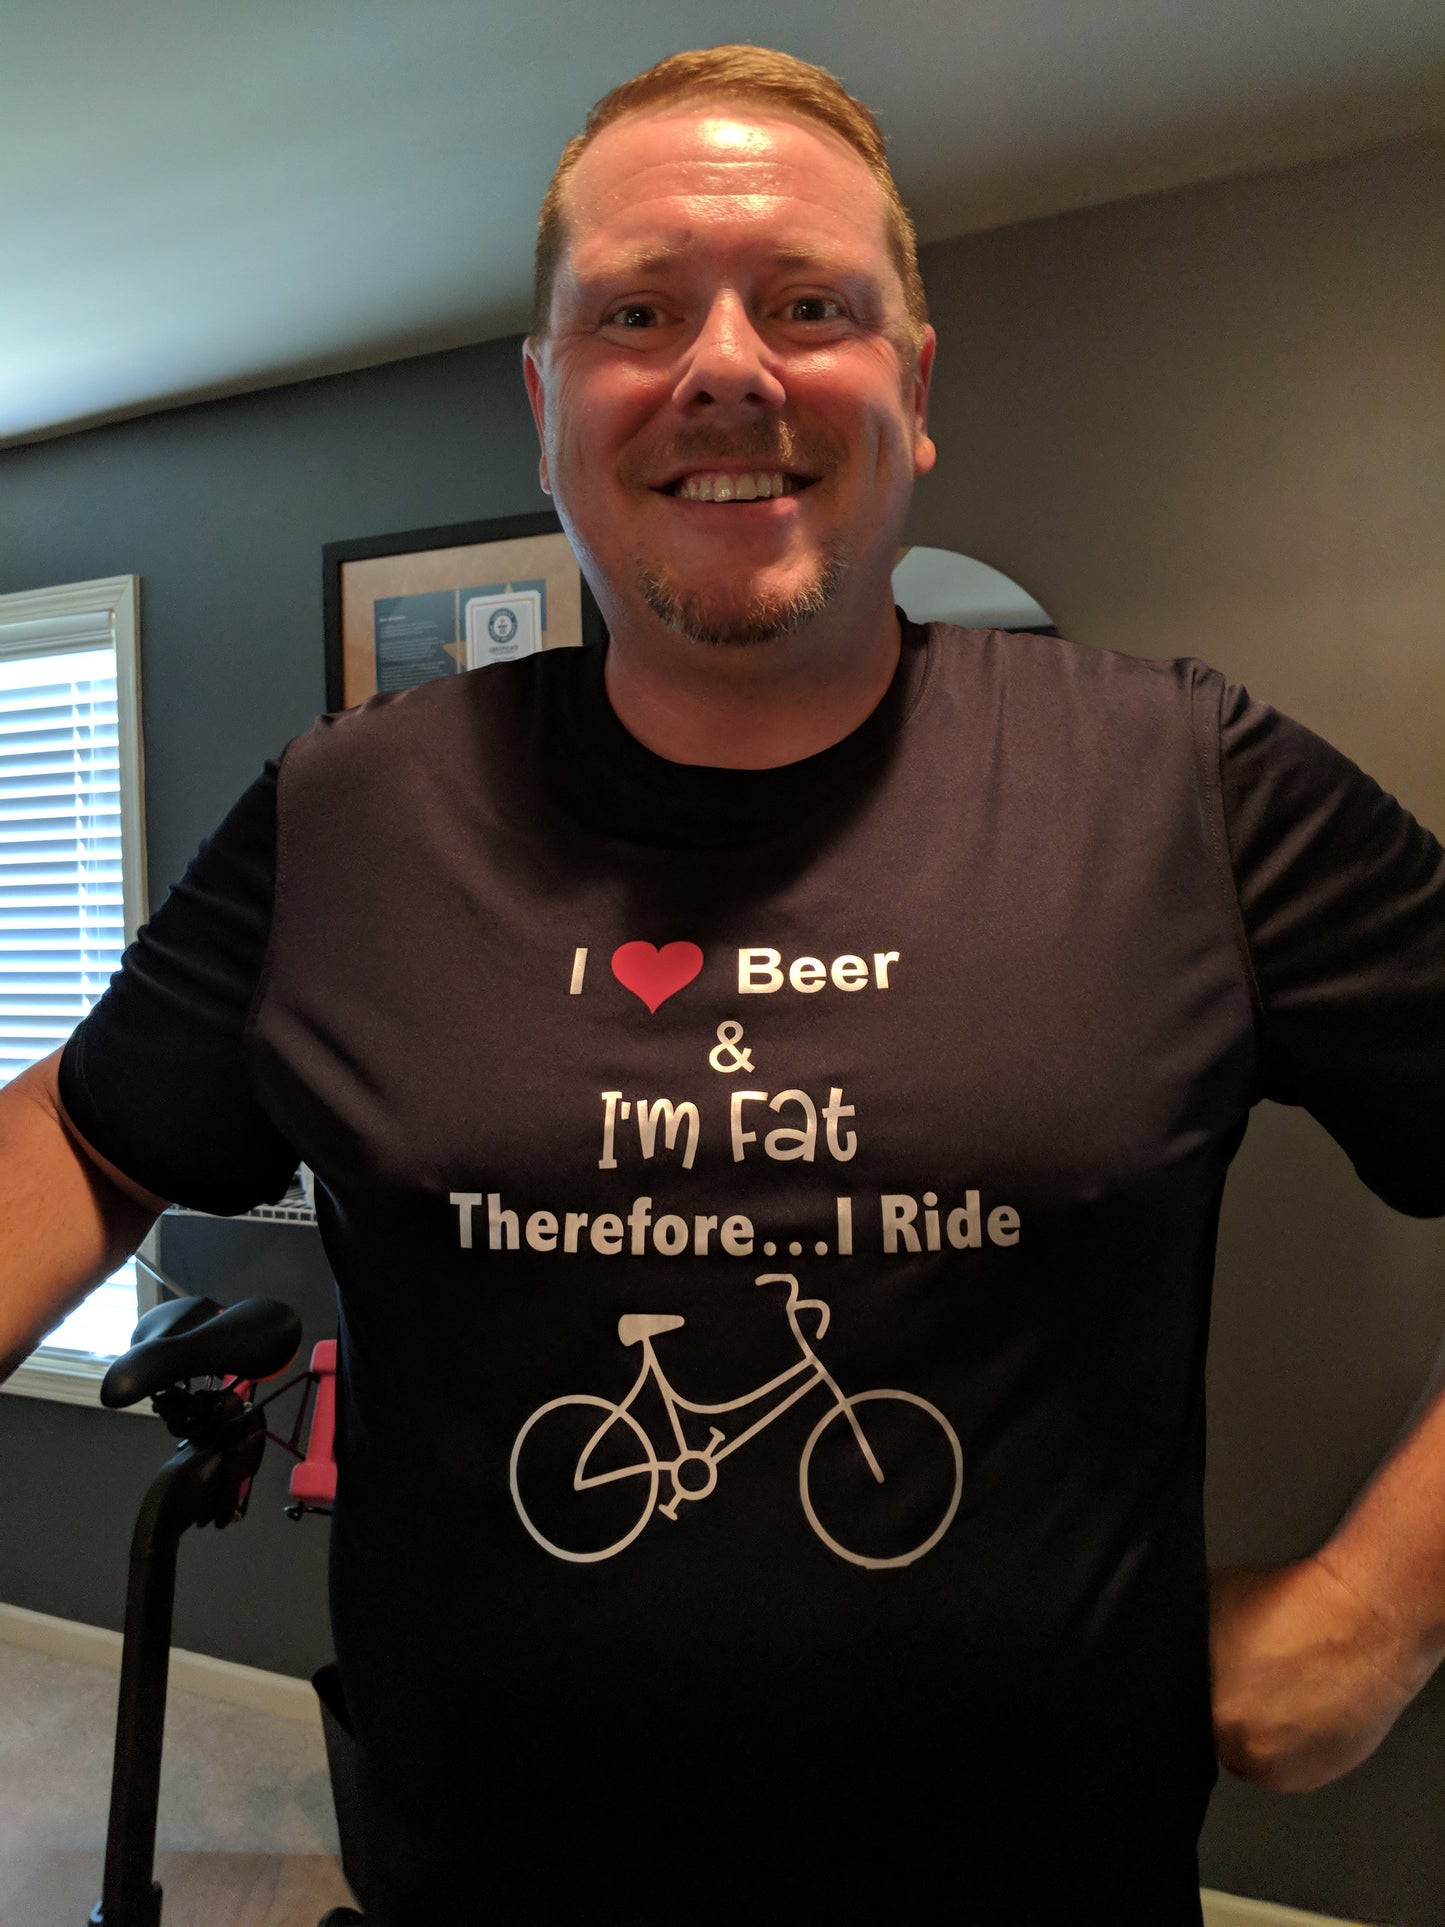 I Love Beer & I'm Fat Therefore...I Ride